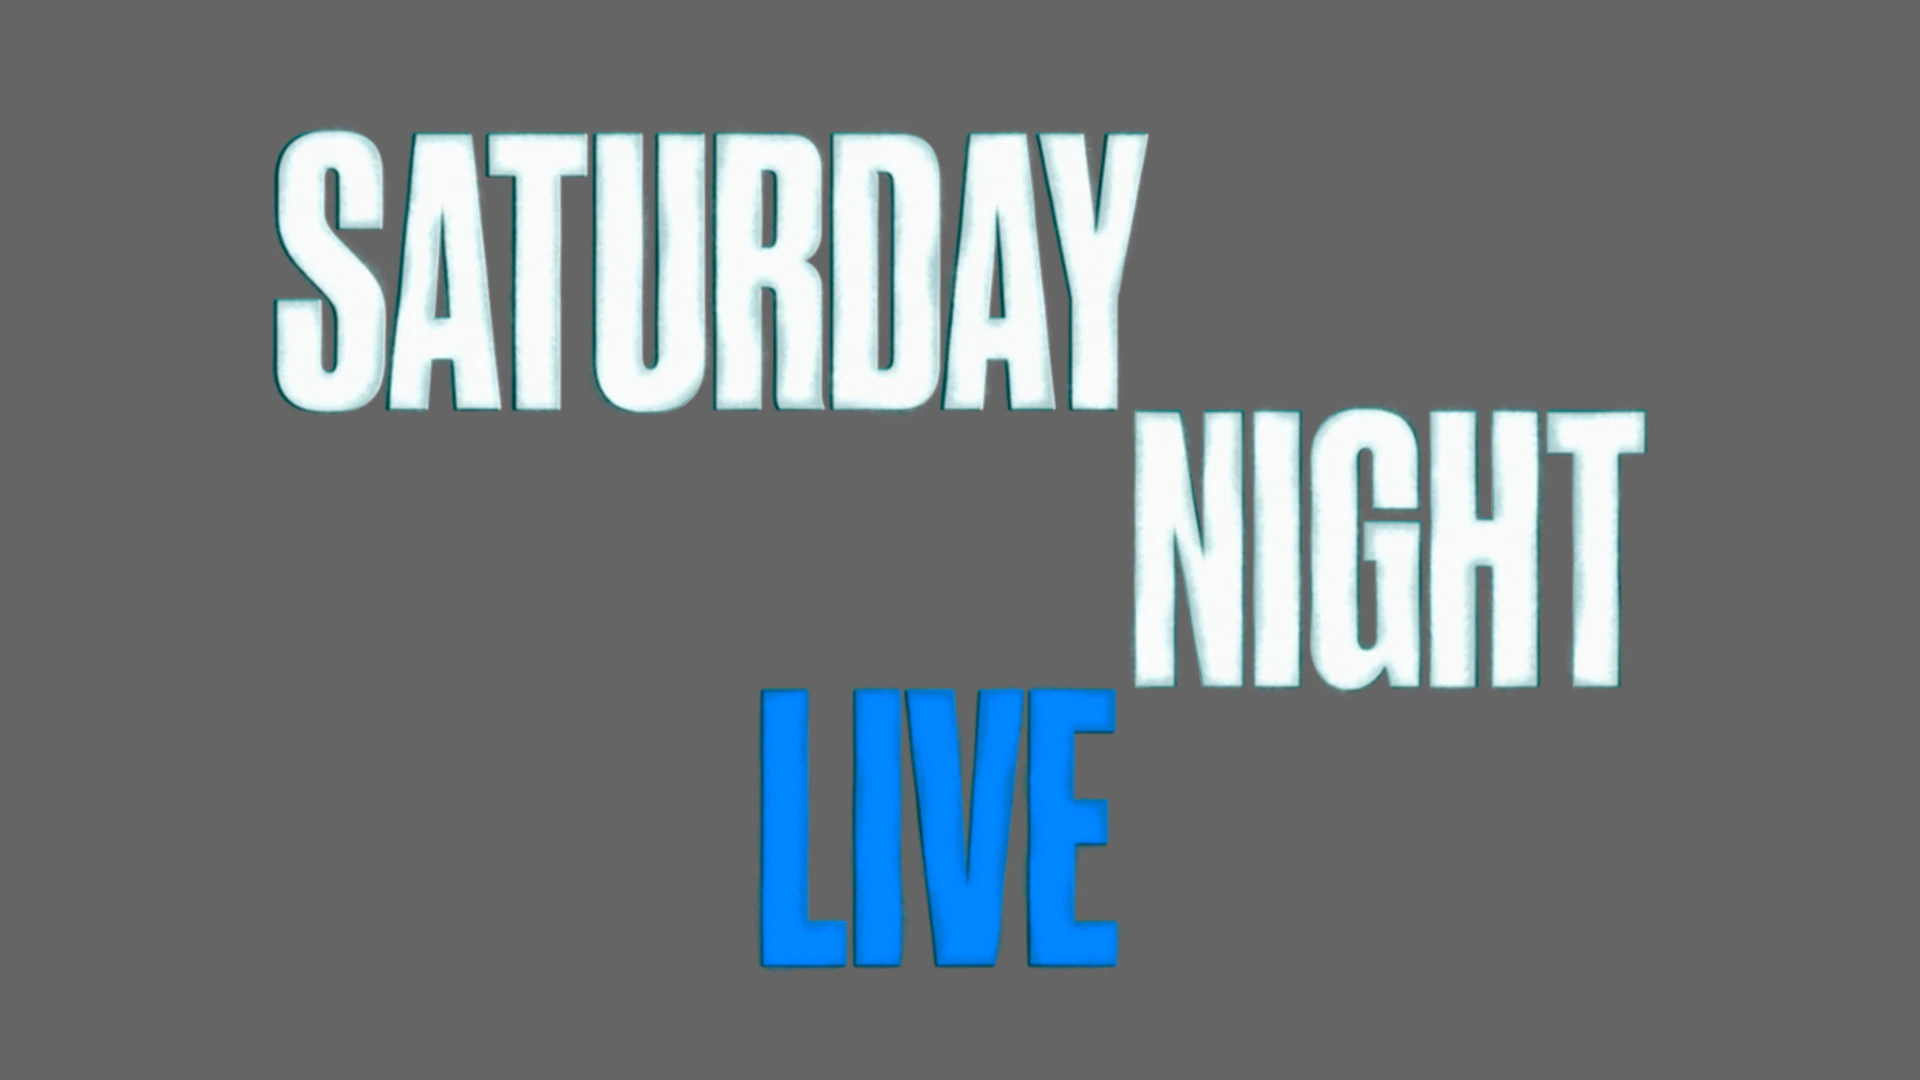 SNL</a><br> by <a href='/profile/Bling-King/'>Bling King</a>